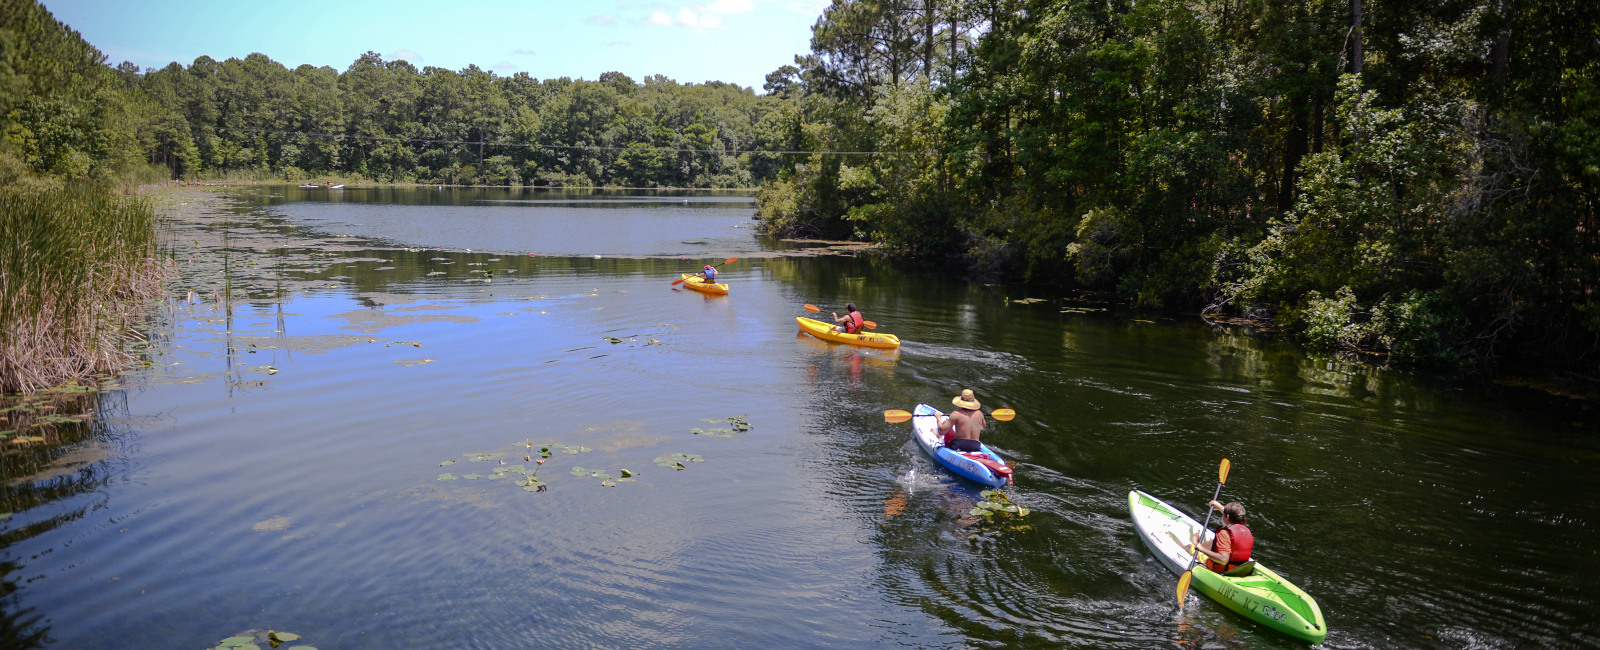 Four kayakers at the UNF Nature Preserve kayaking in the river